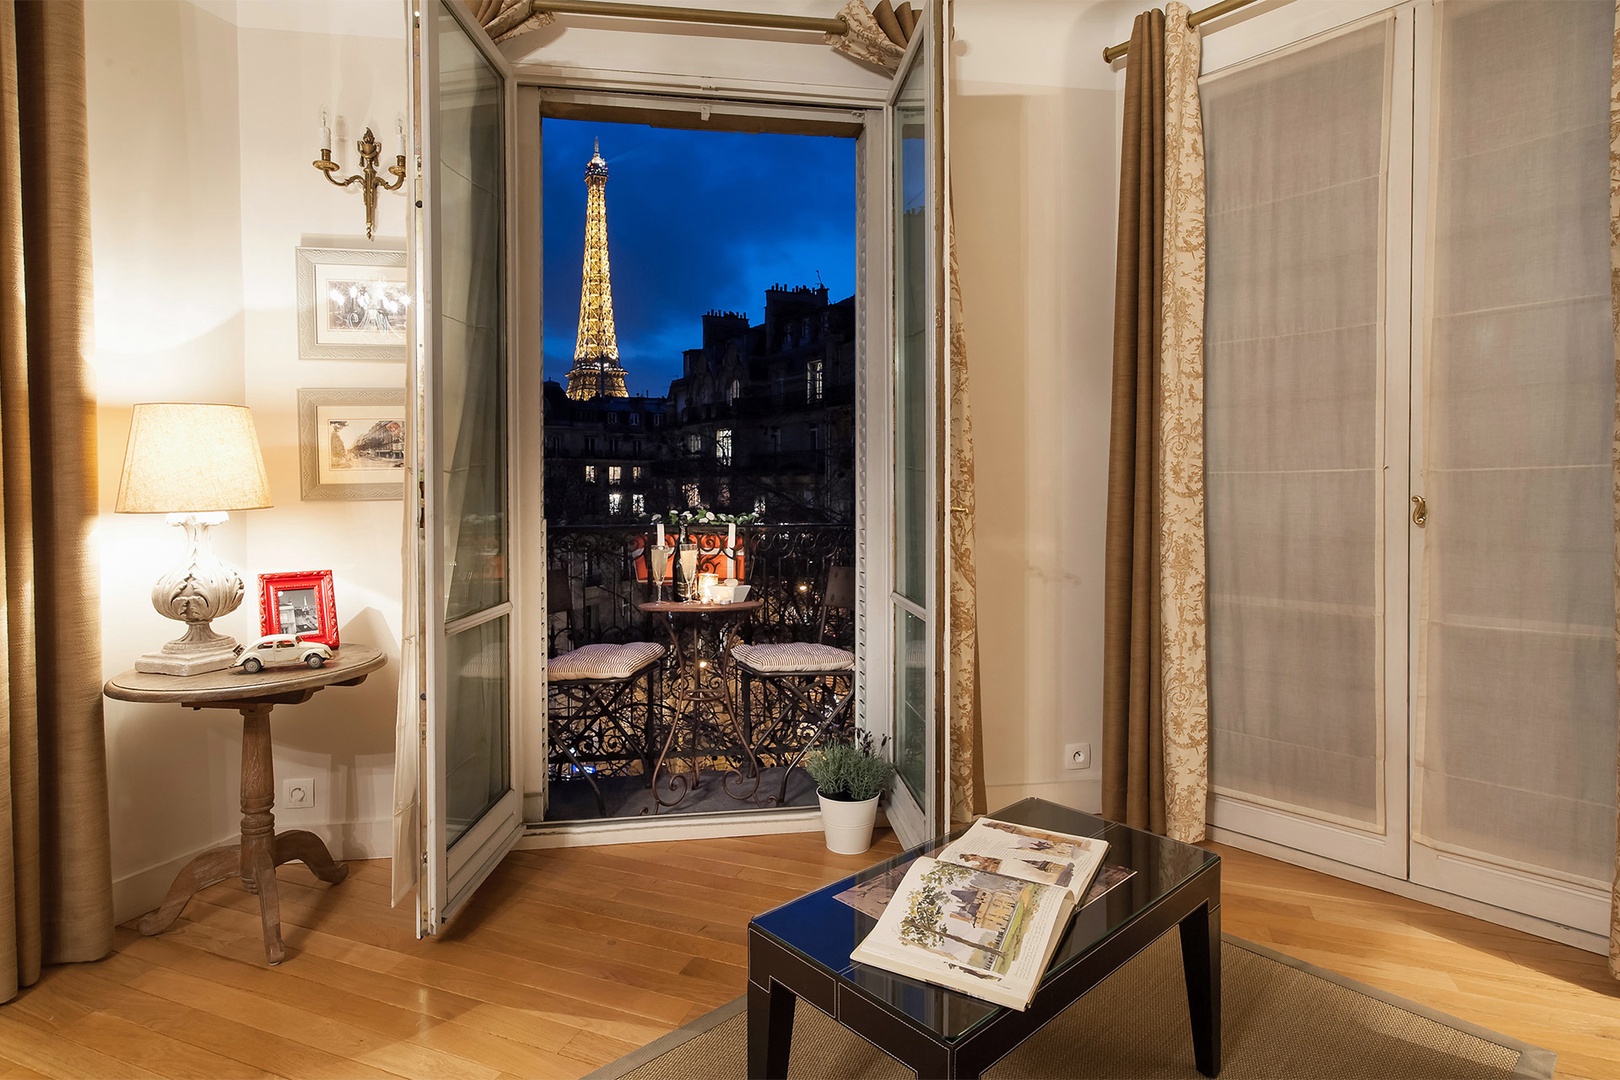 Enjoy direct views of the Eiffel Tower from the sitting room.